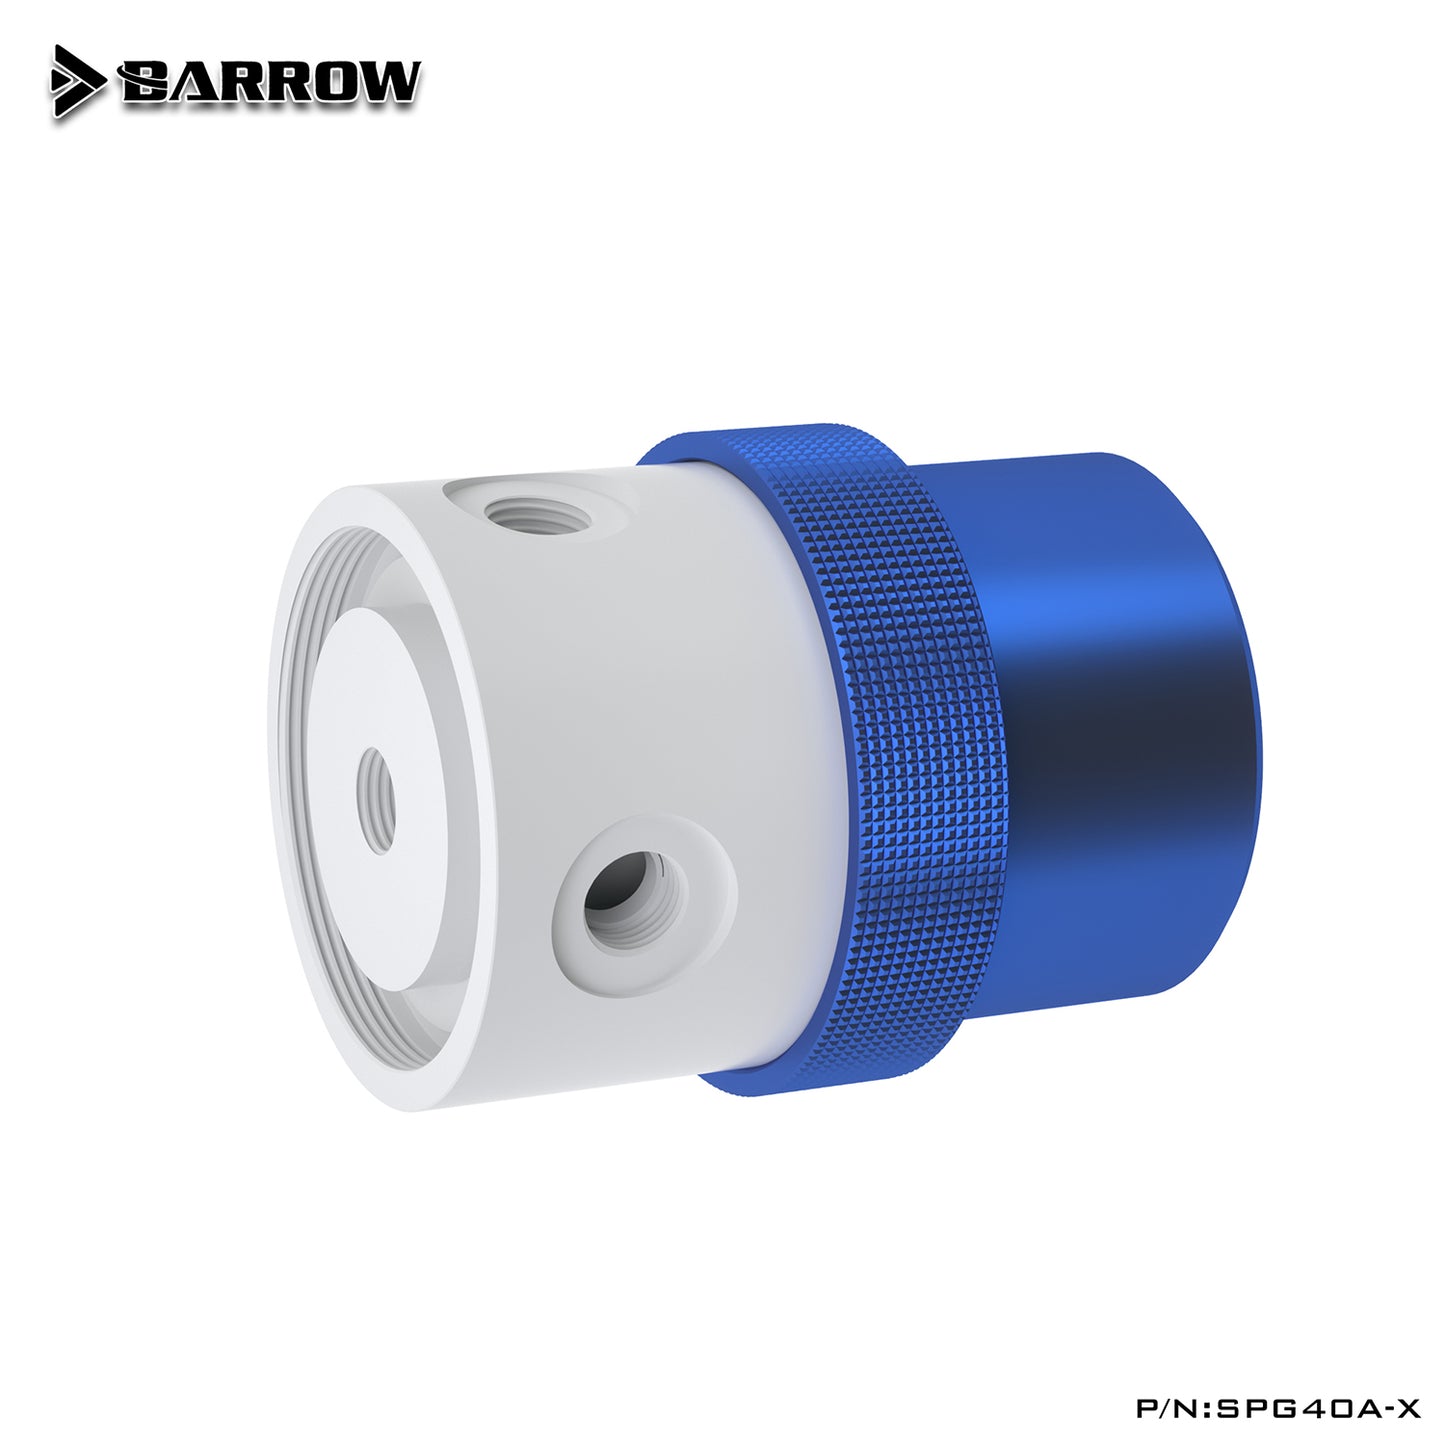 Barrow 18W PWM Pump, D5 Series Multi-color Combination With Aluminum Alloy Heatsink Cover, Water Cooling Pump, SPG40A-X